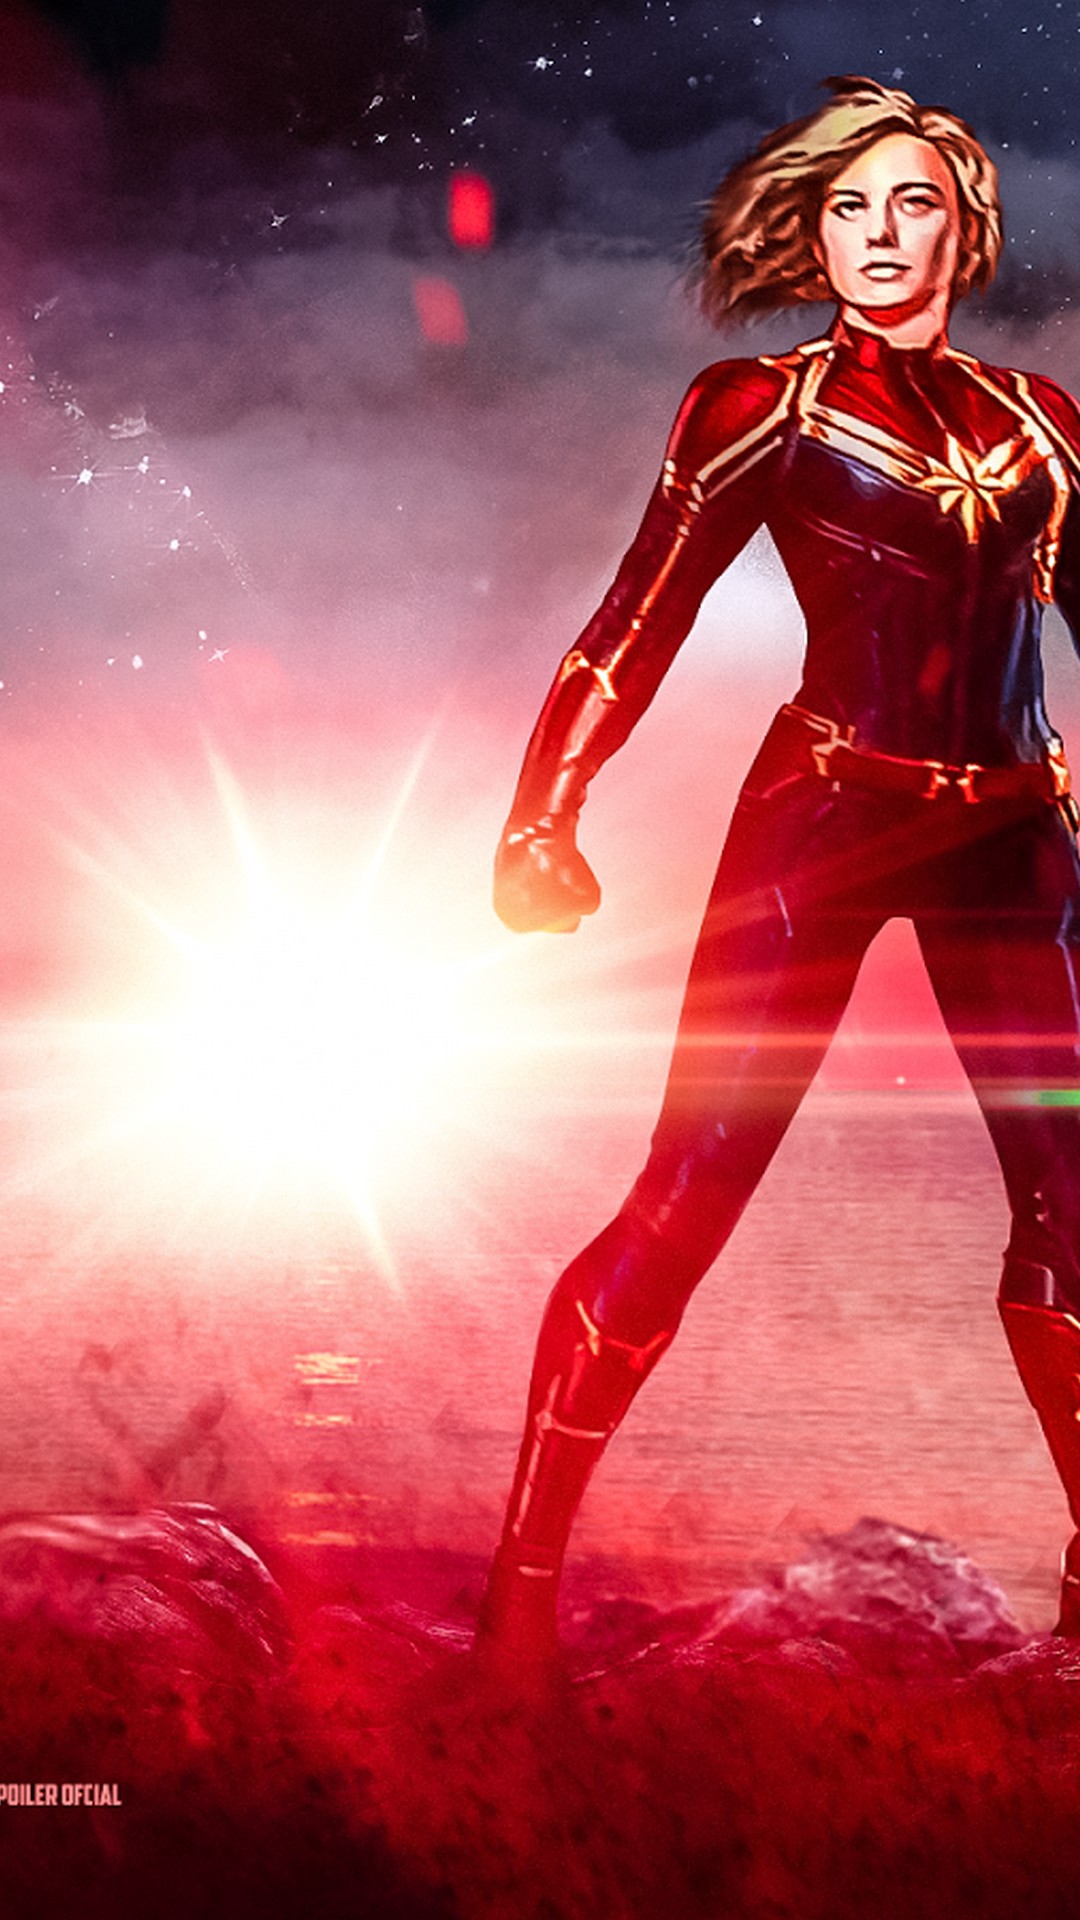 Mobile Wallpapers Captain Marvel With high-resolution 1080X1920 pixel. You can use this wallpaper for your iPhone 5, 6, 7, 8, X backgrounds, Mobile Screensaver, or iPad Lock Screen